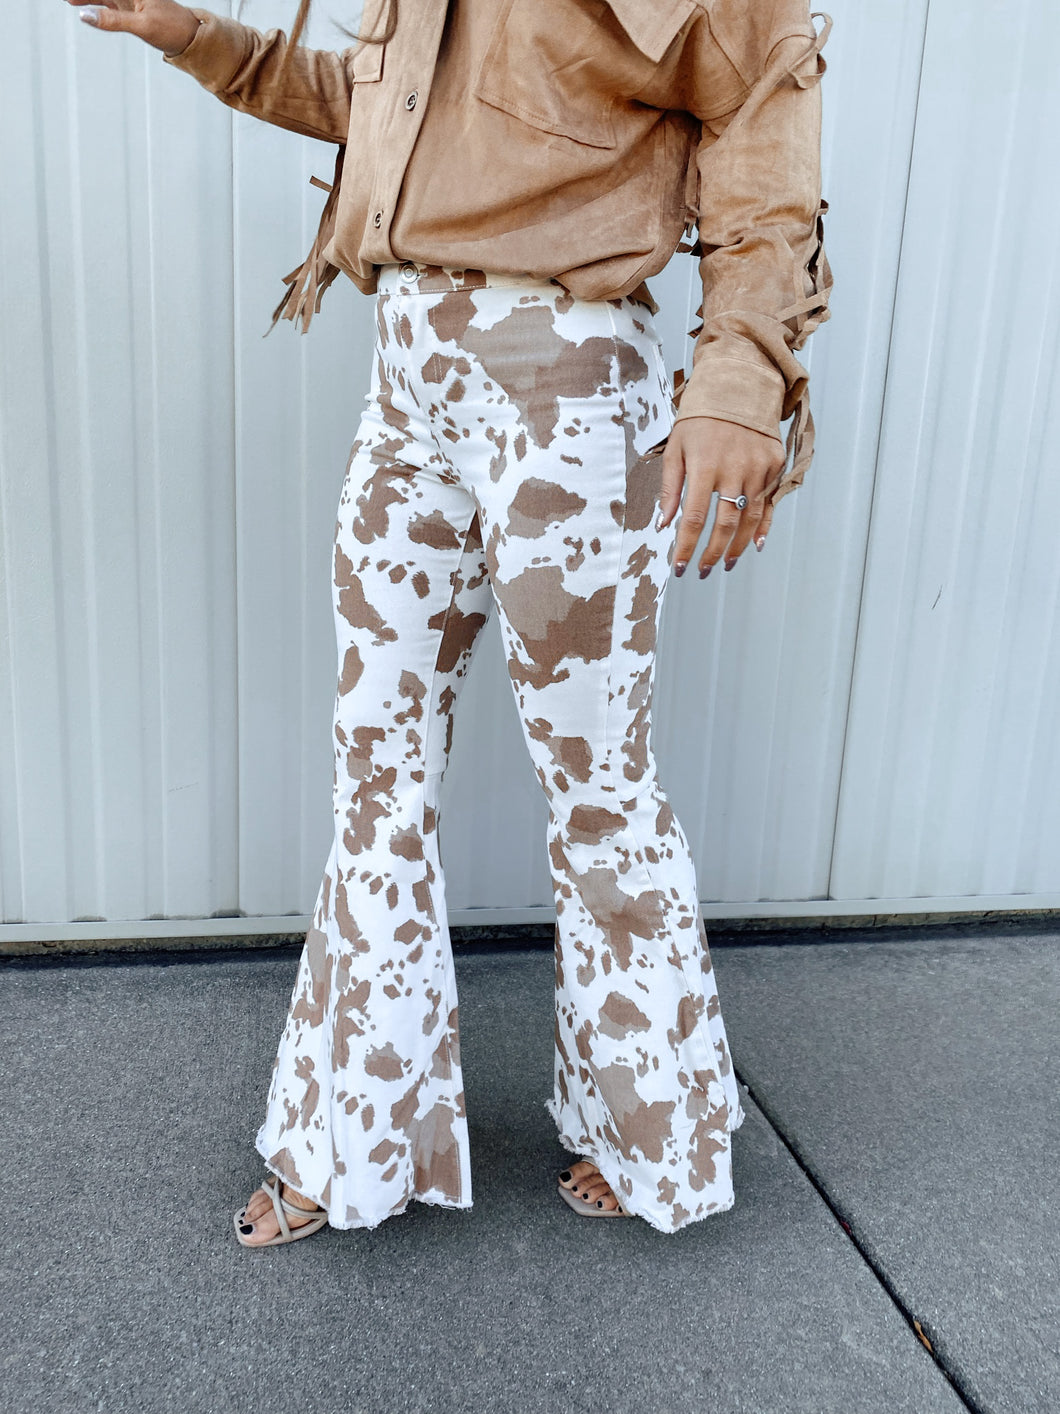 Cow Print Flare Jeans